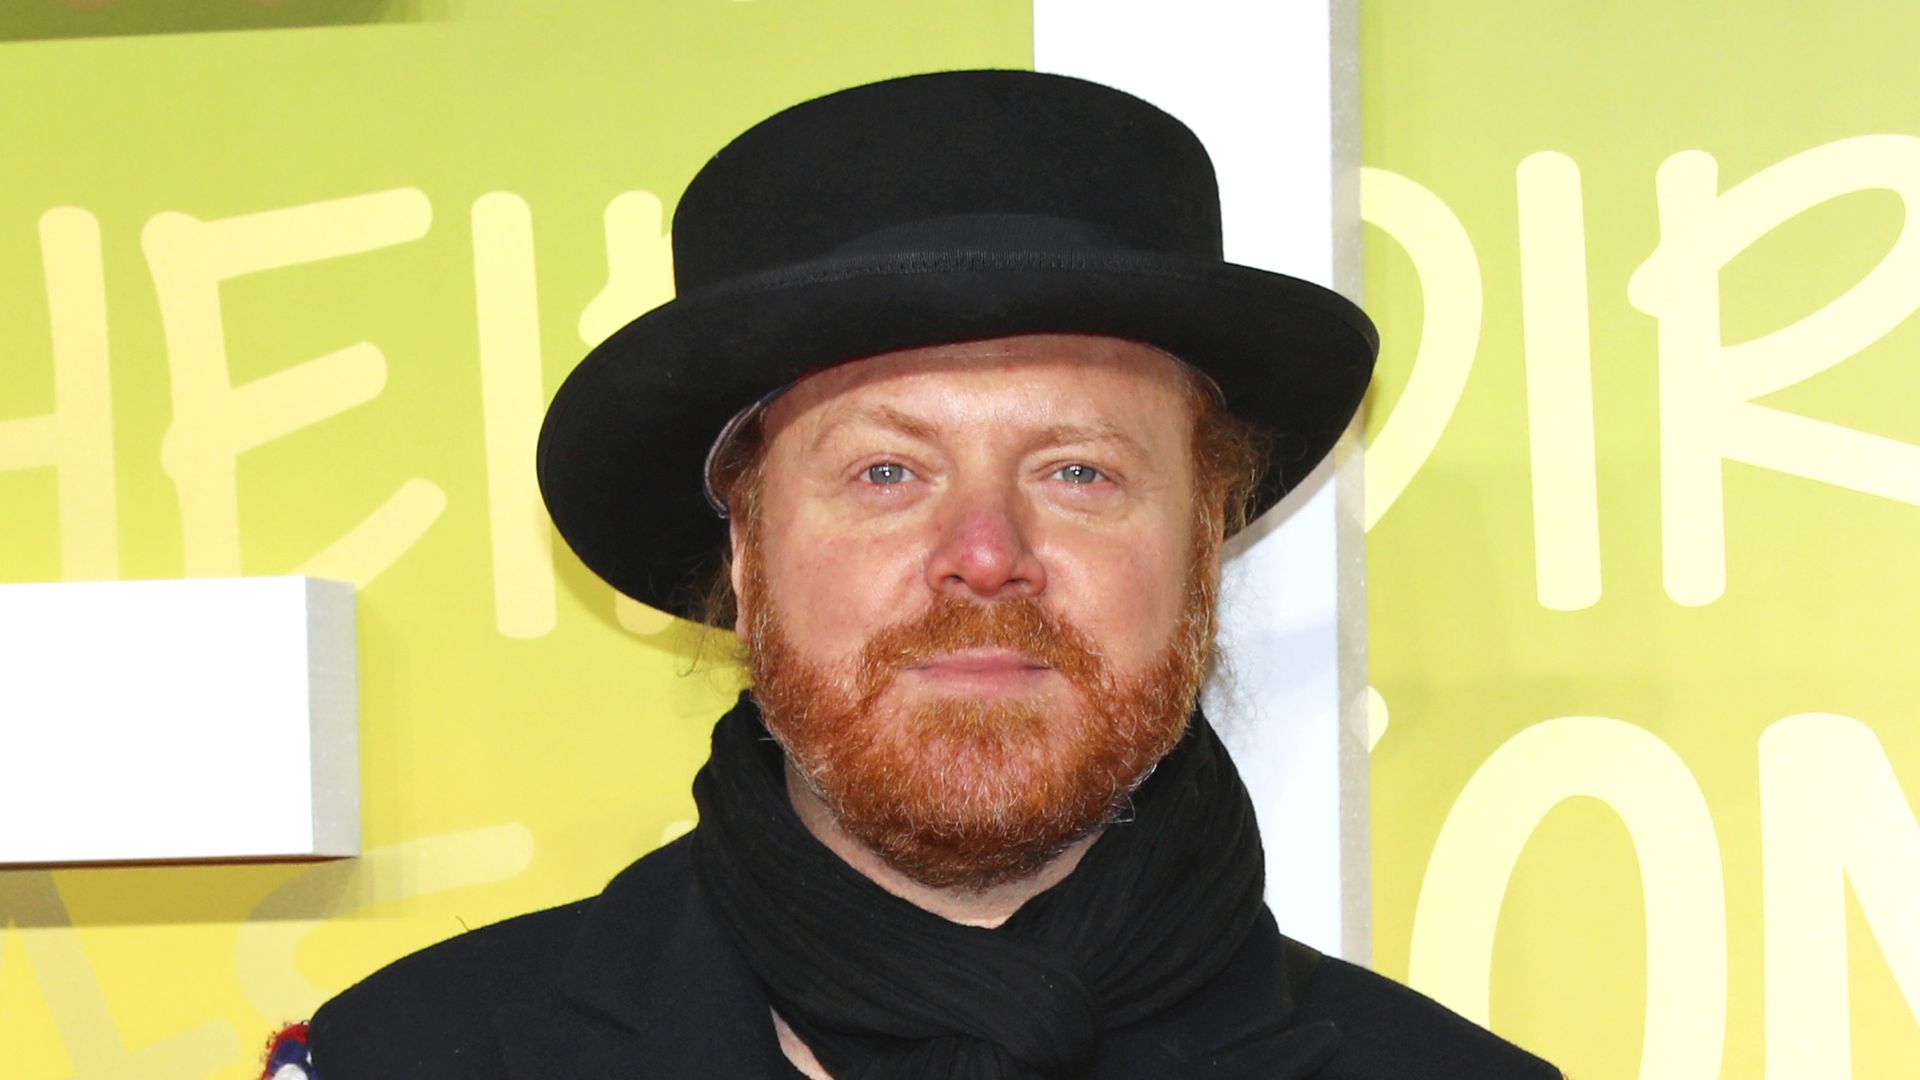 Keith Lemon looks besotted in throwback photos with rarely-seen wife Jill